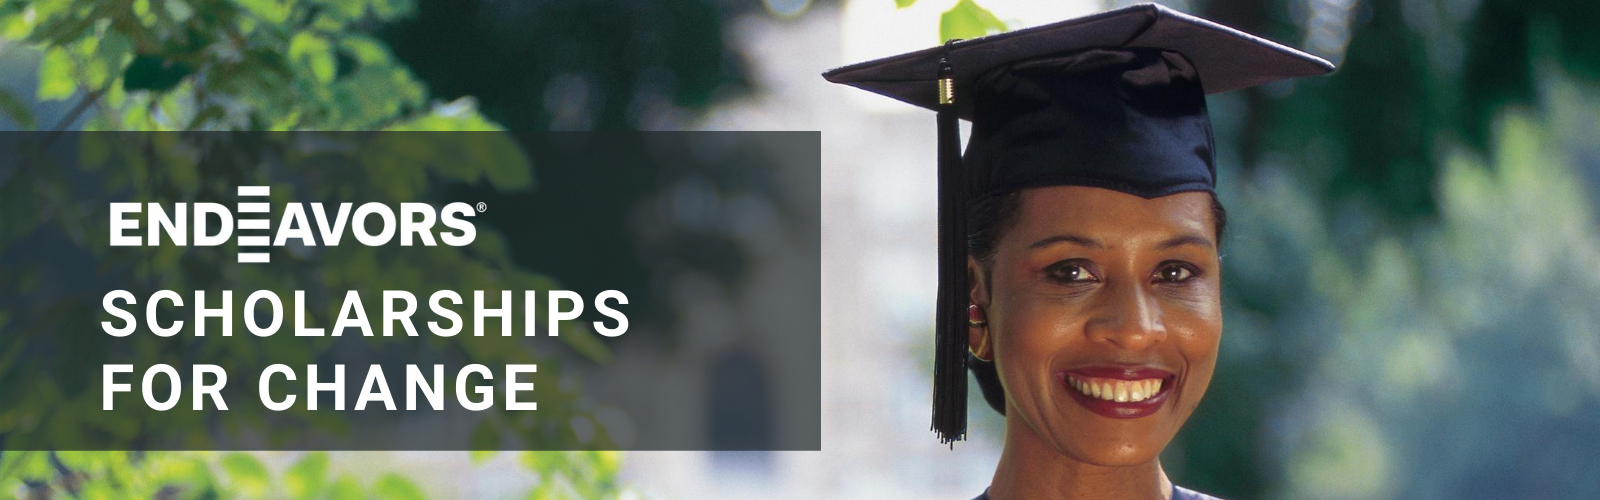 Endeavors Announces $10,000 Annual Scholarships for Black Students in North Carolina and Texas